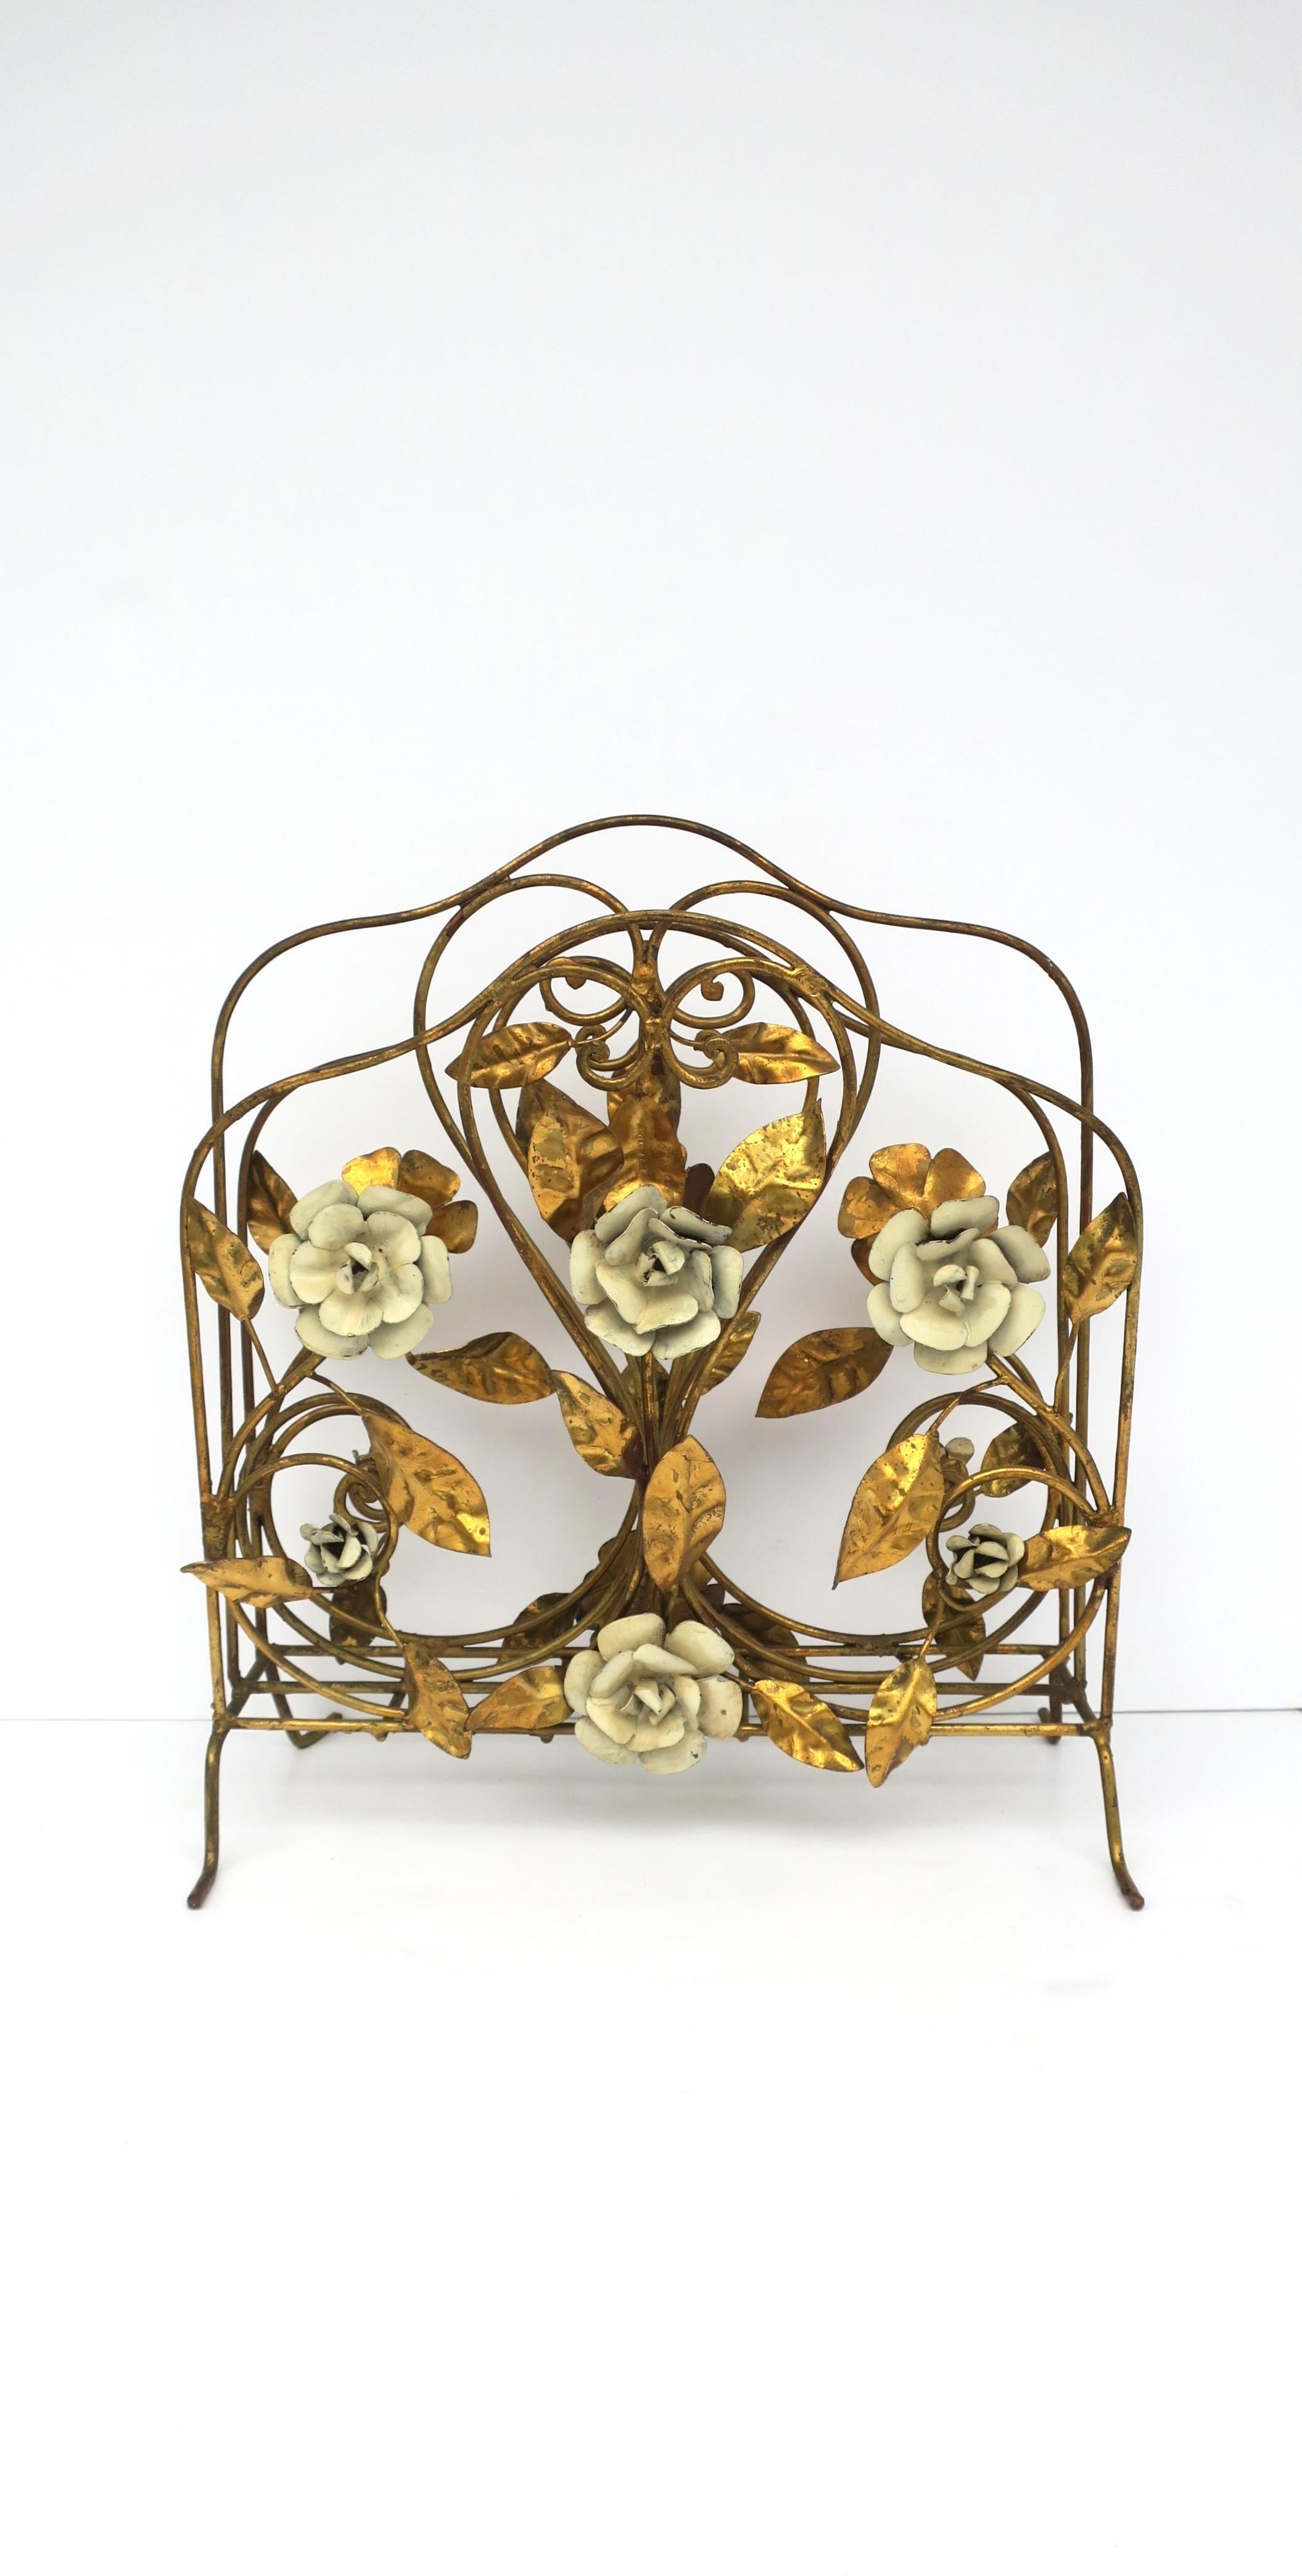 A beautiful Italian gold gilt and enamel magazine holder rack with flowers and leaves, circa mid-20th century, 1950s, Italy. Holder has beautiful enamel flowers and gold gilt leaves on front and back. Piece has two storage compartment areas to hold